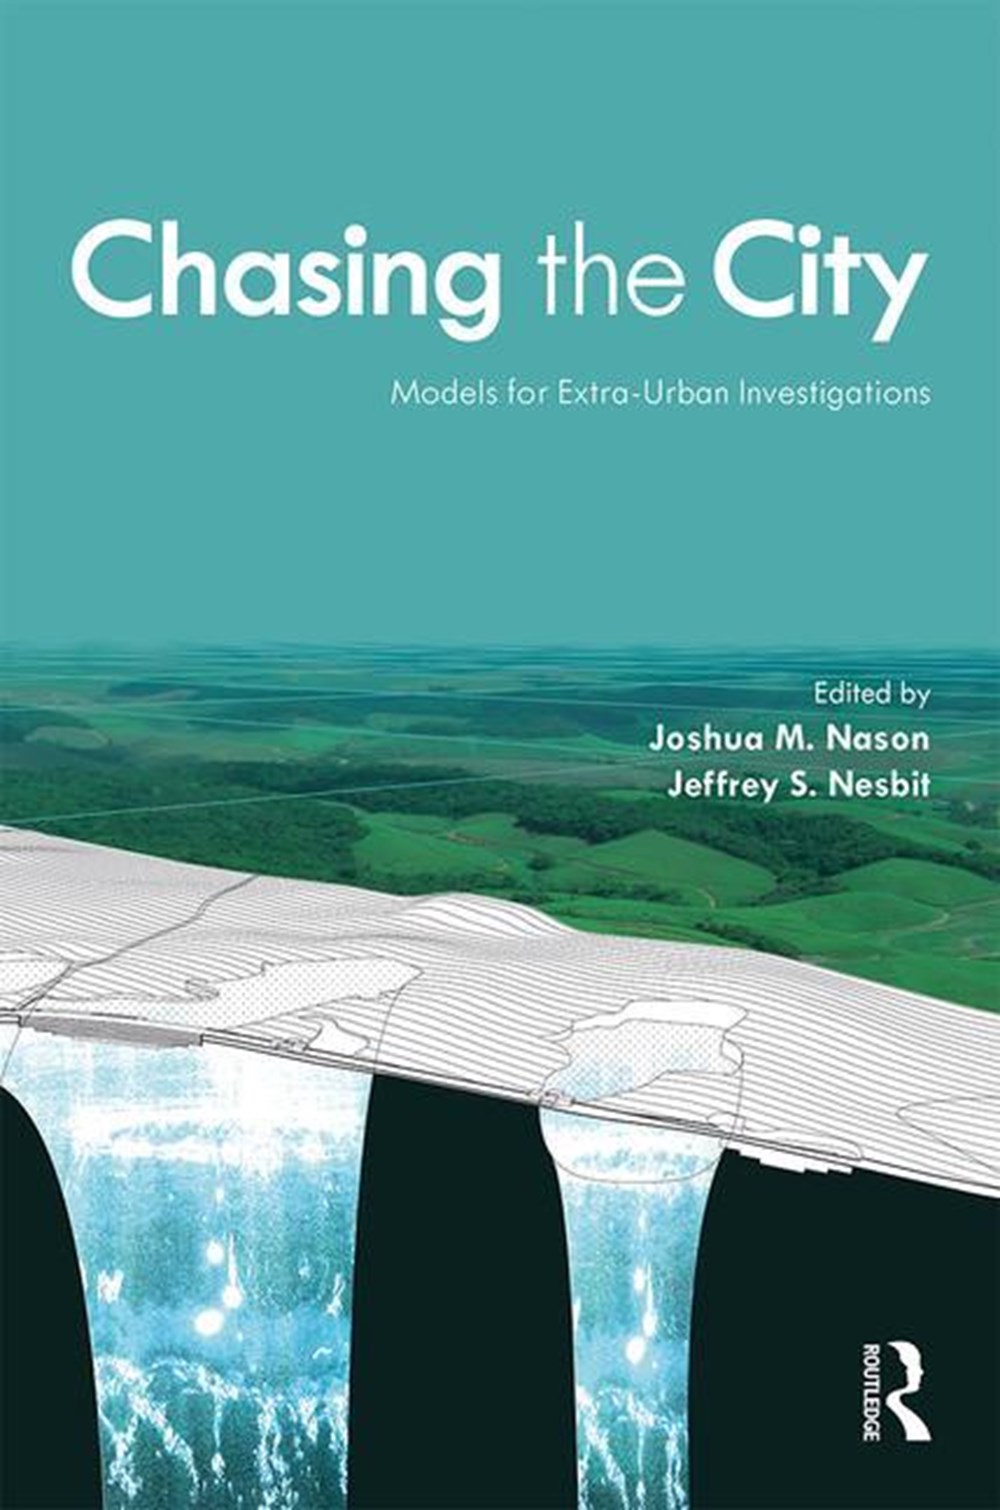 Chasing the City: Models for Extra-Urban Investigations